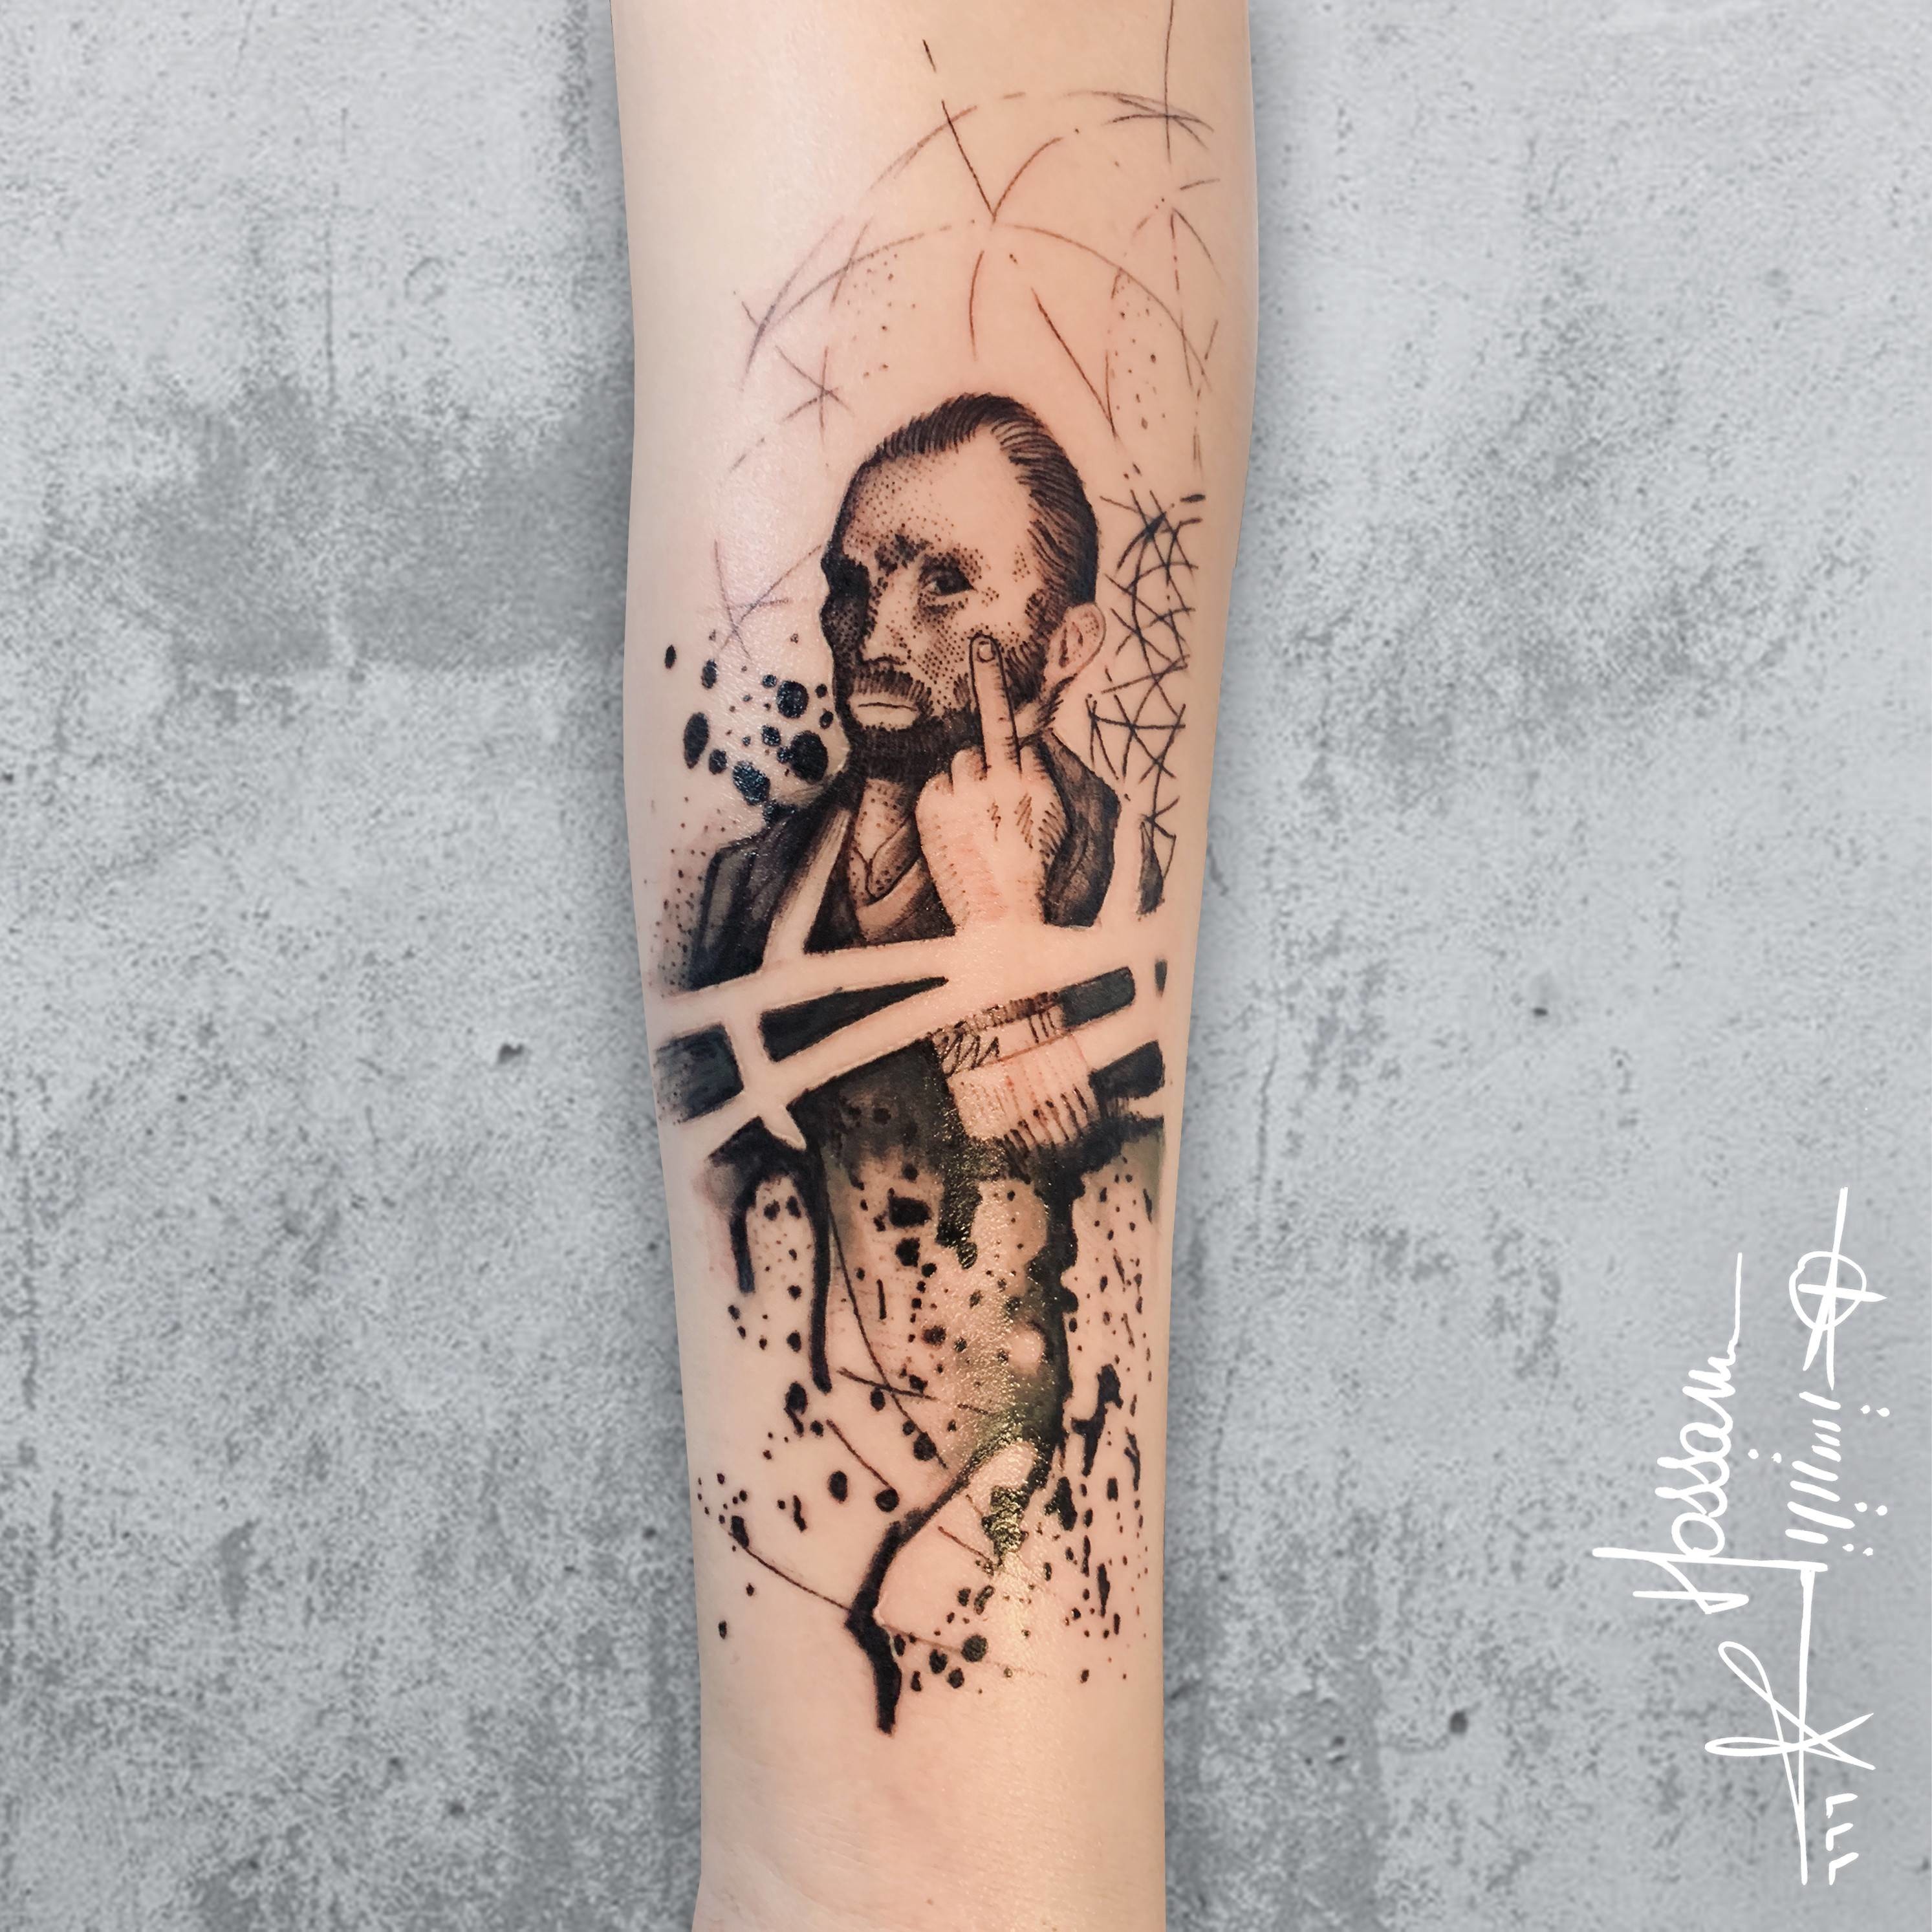 TatMasters - Read everything about Abstract tattoos